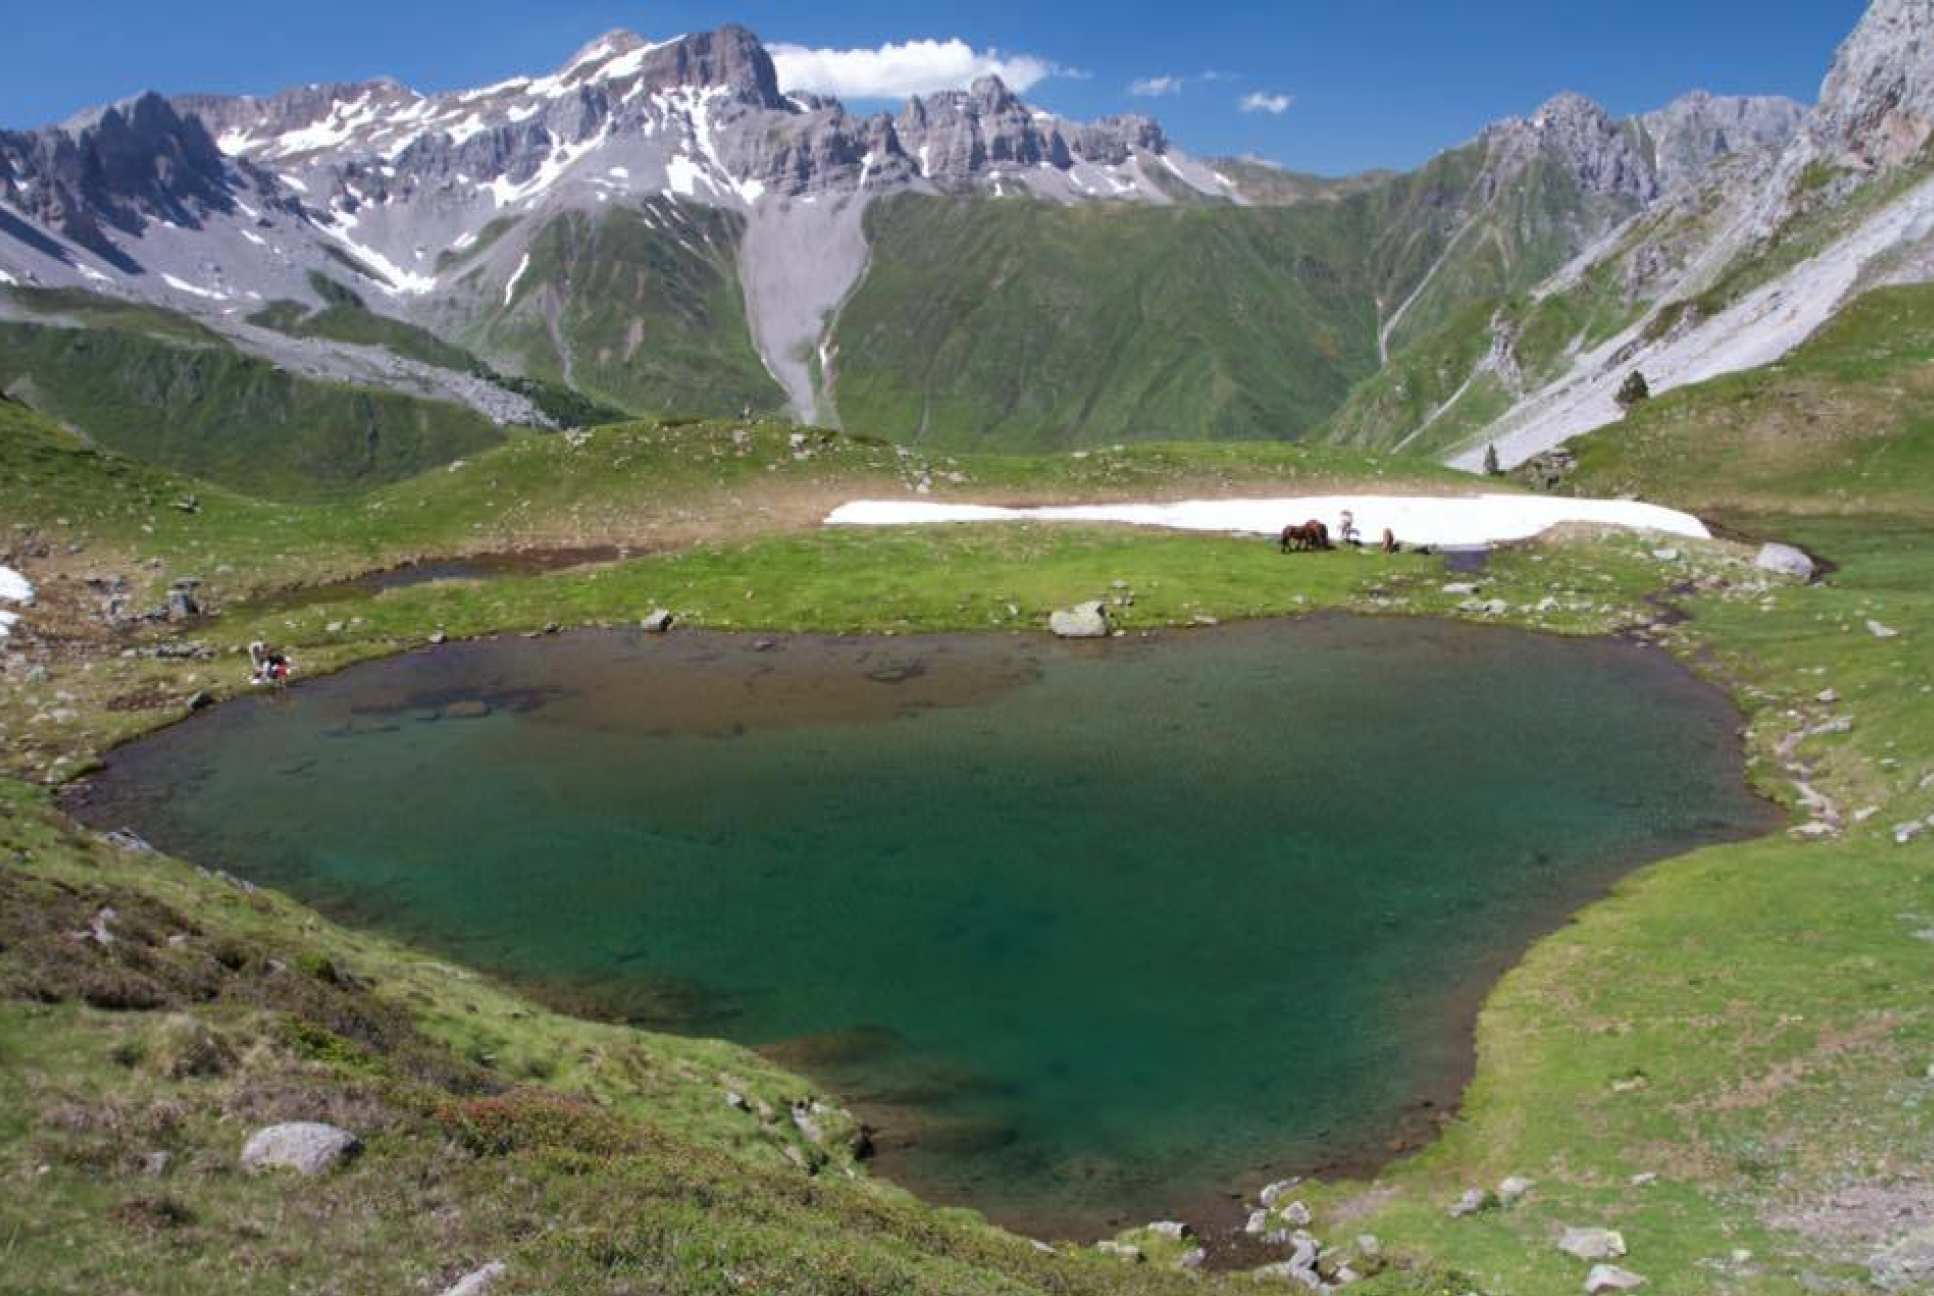 The toads' habitat in the Pyrenees